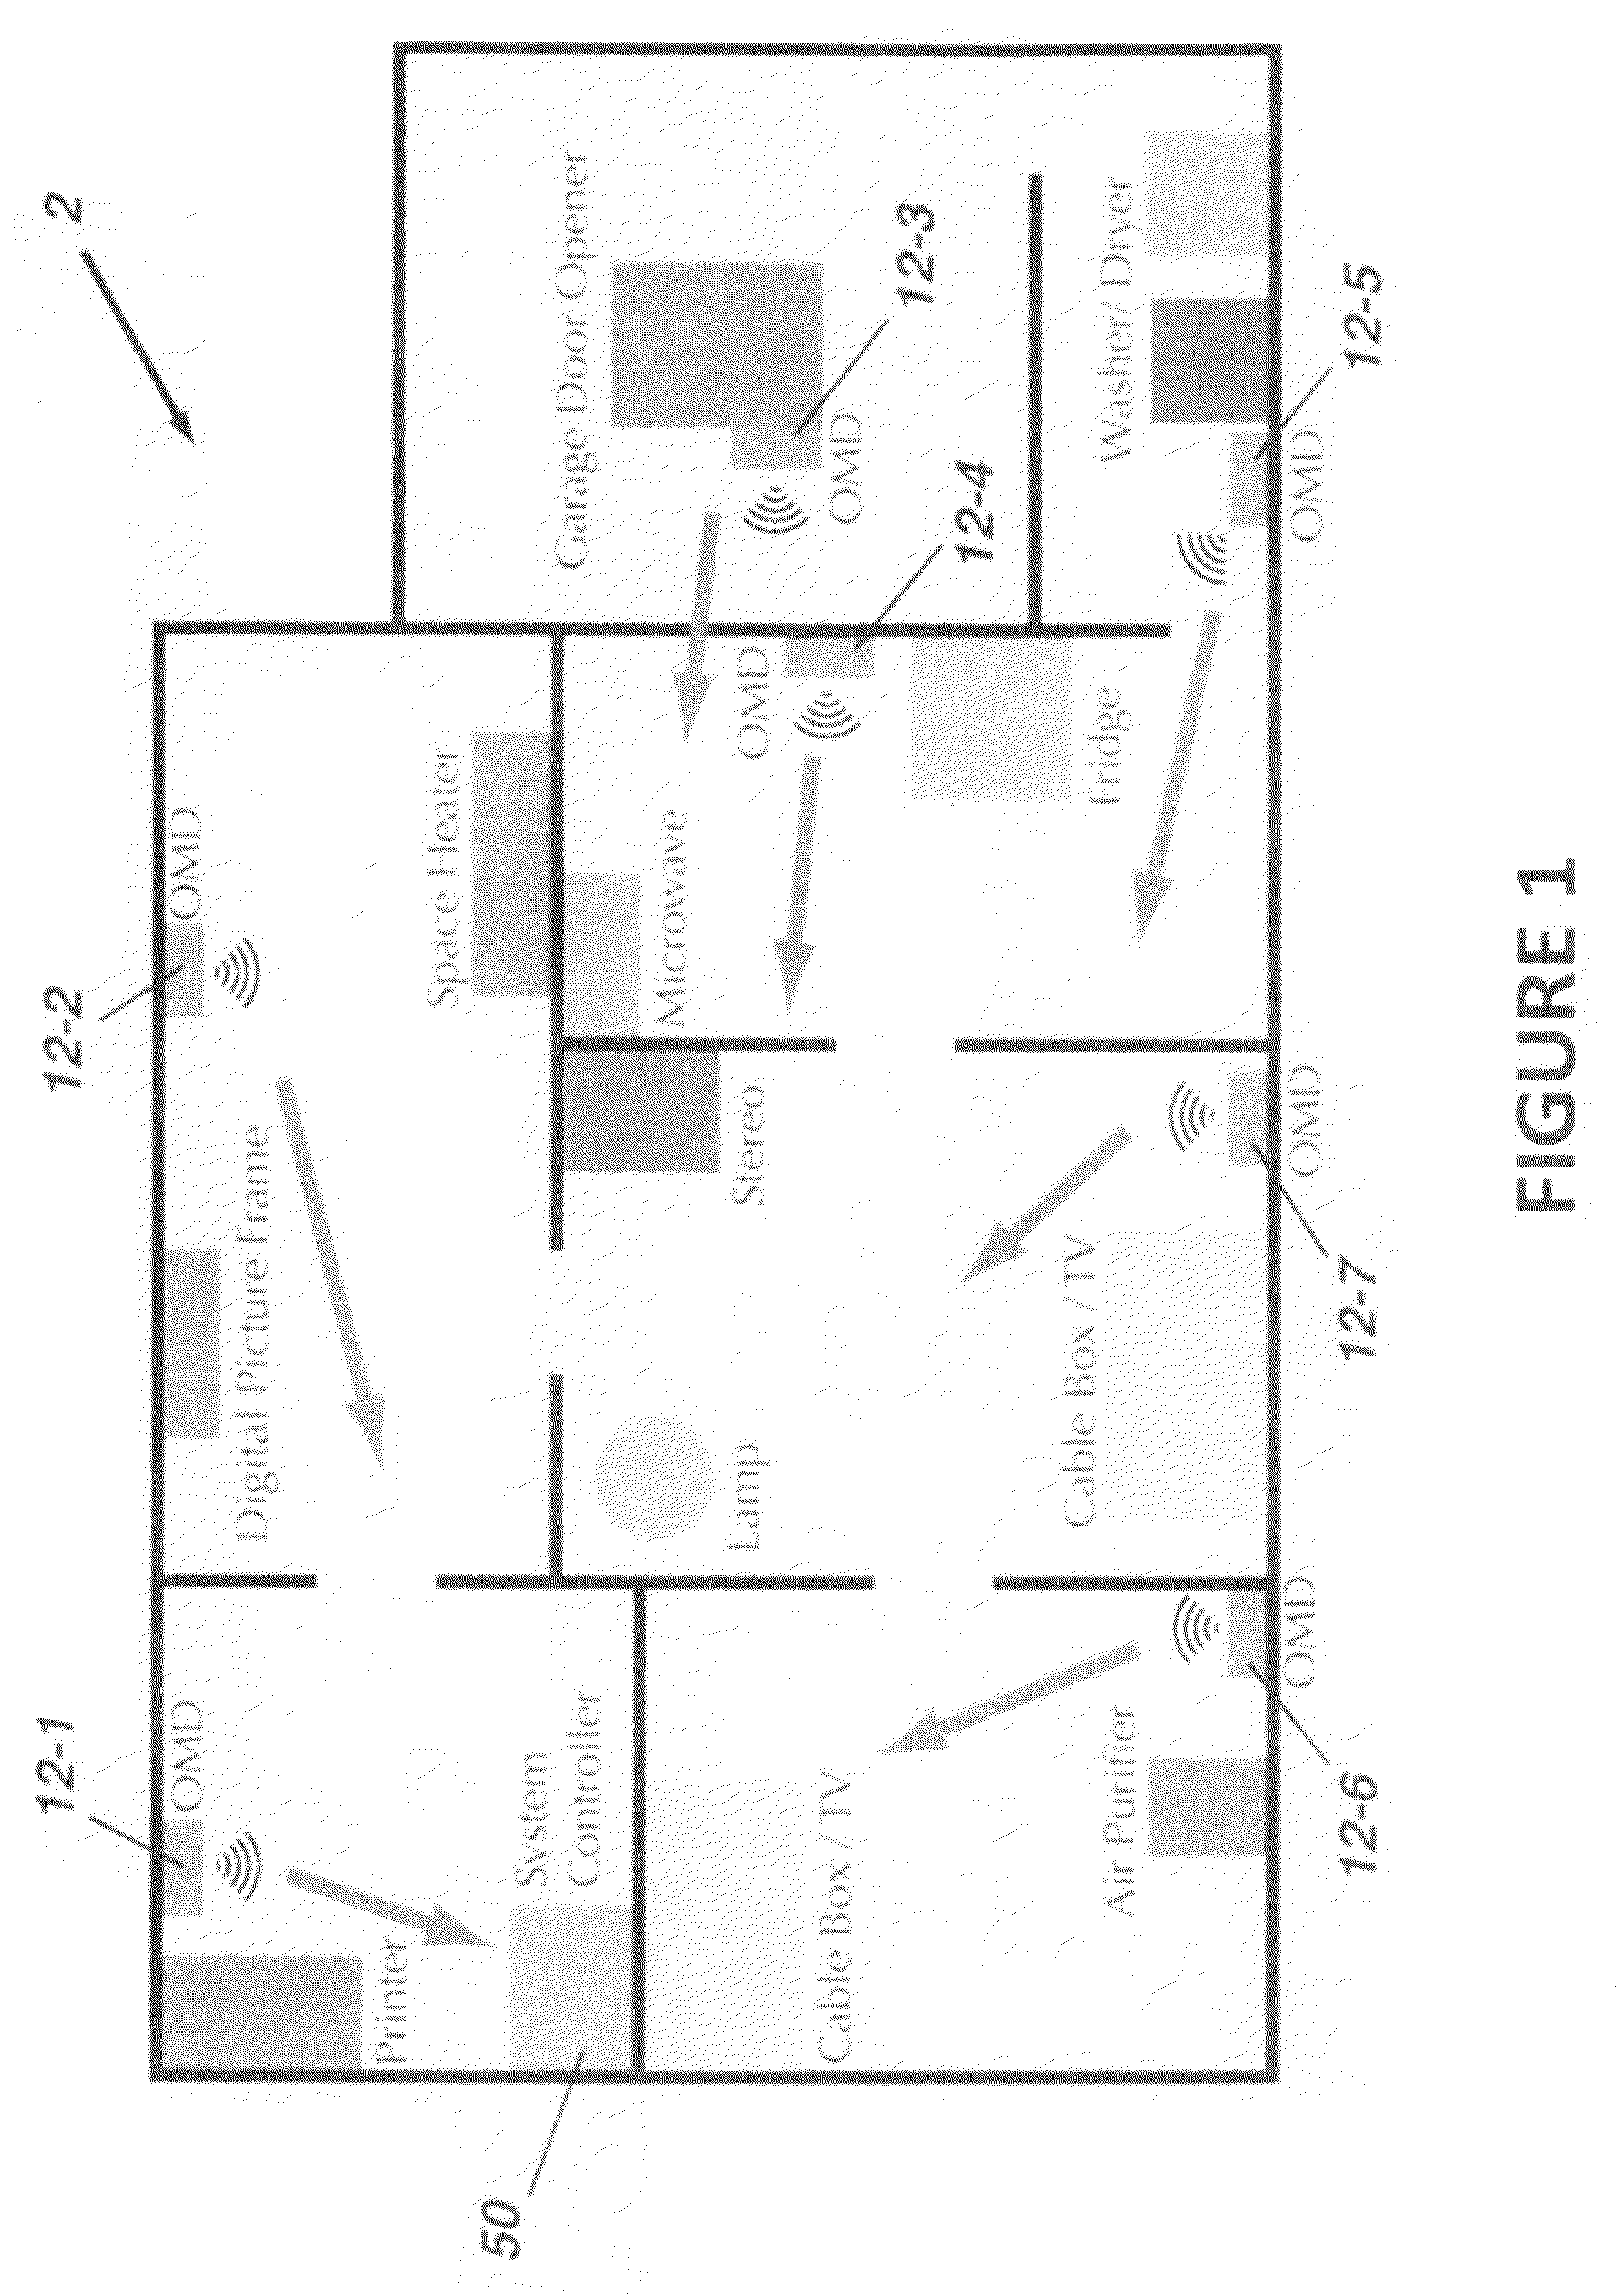 System and method for monitoring and management of utility usage